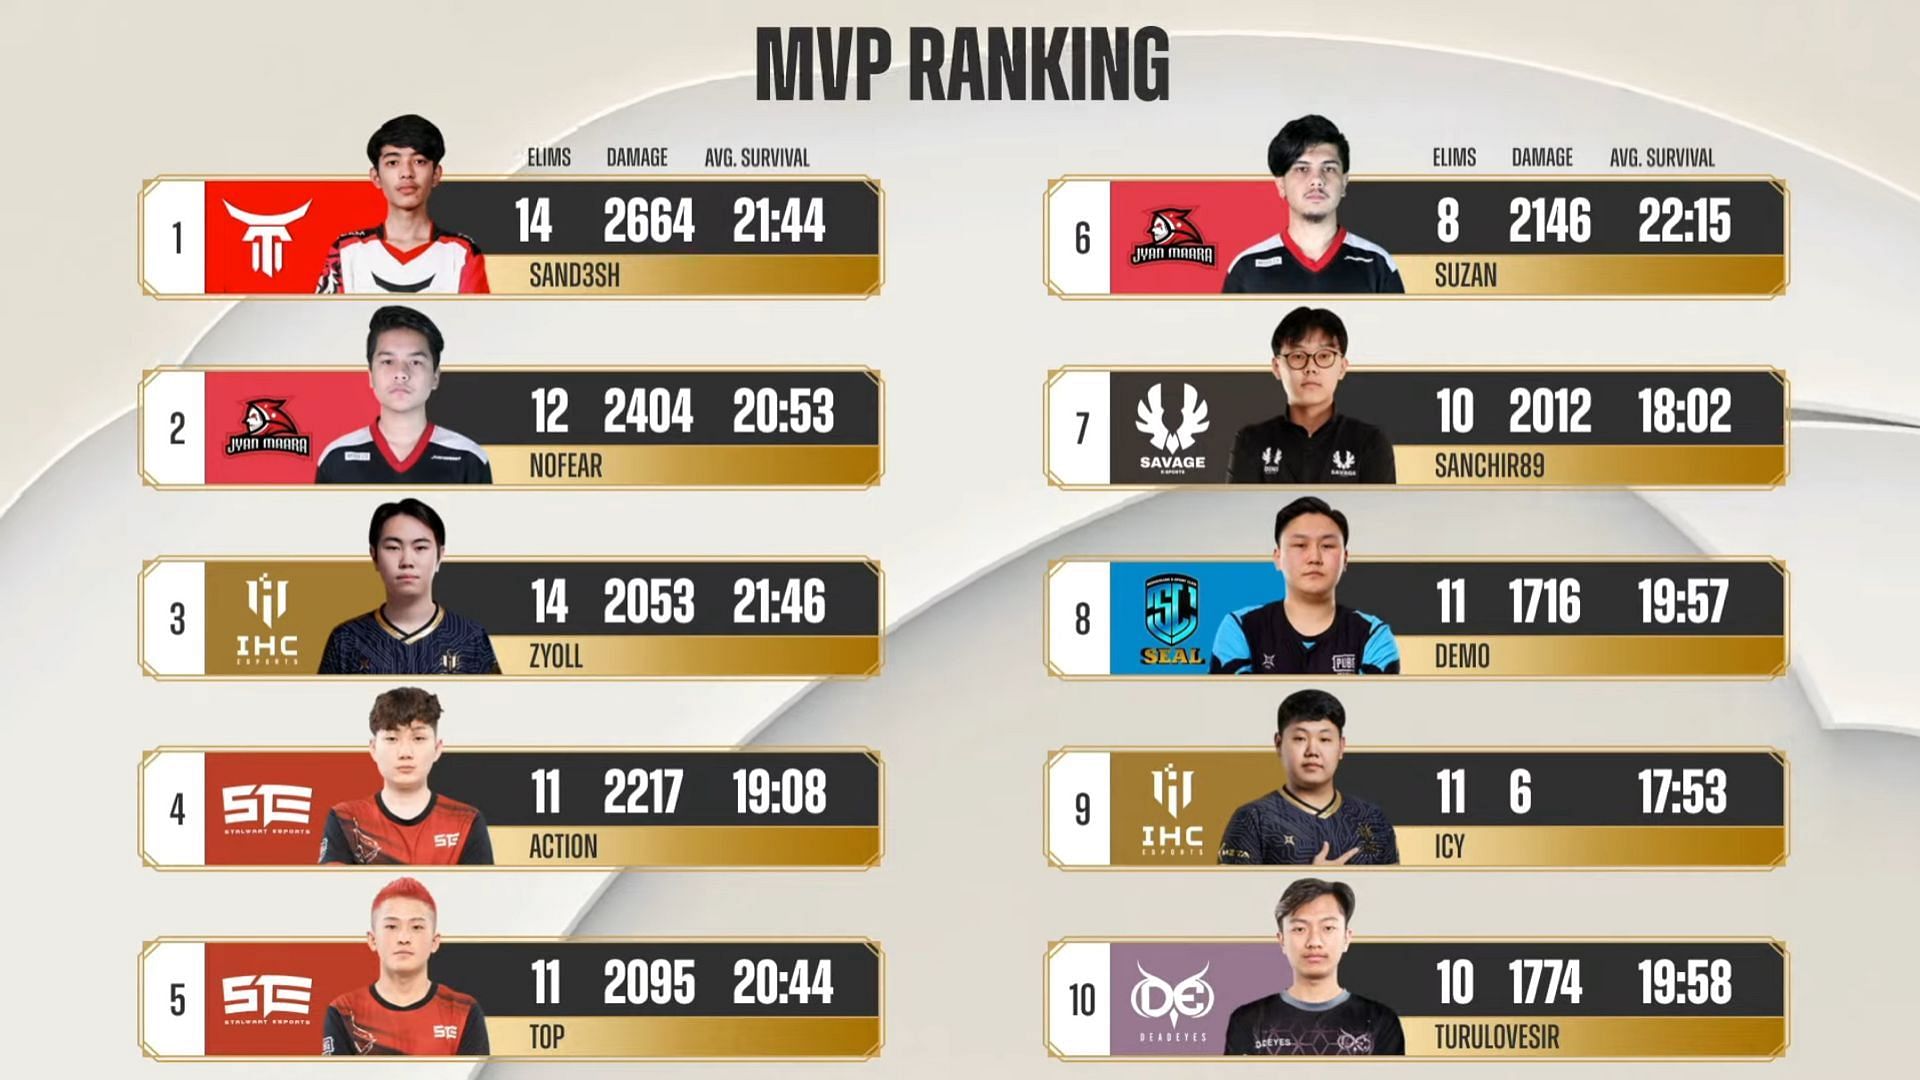 🏆Overall Rankings of 2022 PMPL - PUBG MOBILE Esports